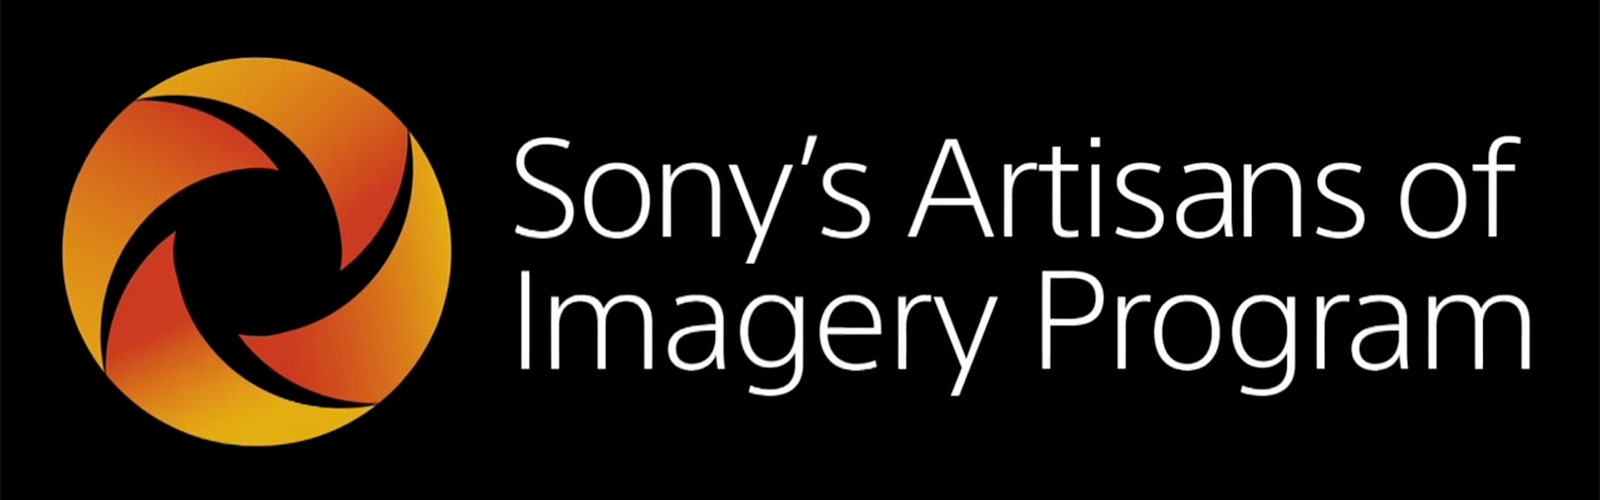 Sony Artisans of Imagery